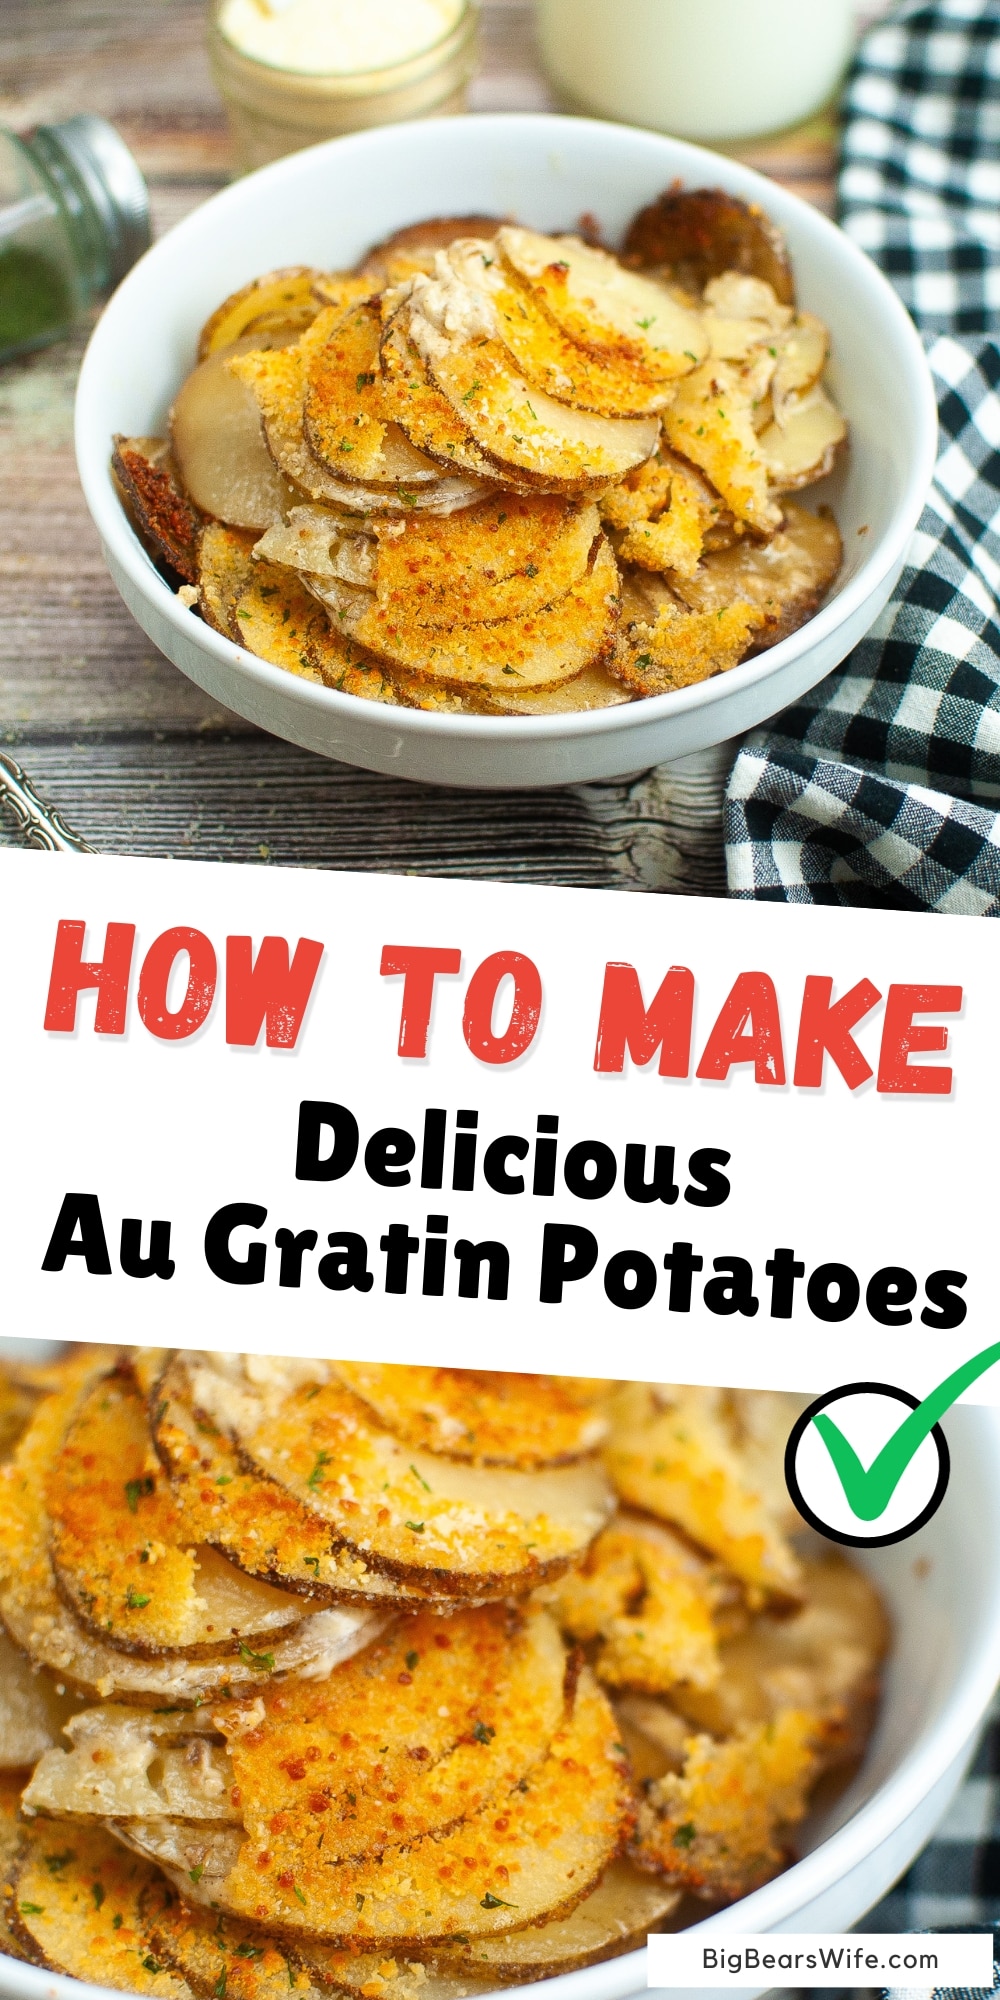 Need a new side dish for dinner? Tired of the same ol' sides that rotate through the dinner menu? Give these Au Gratin Potatoes a try to change it up some!  via @bigbearswife